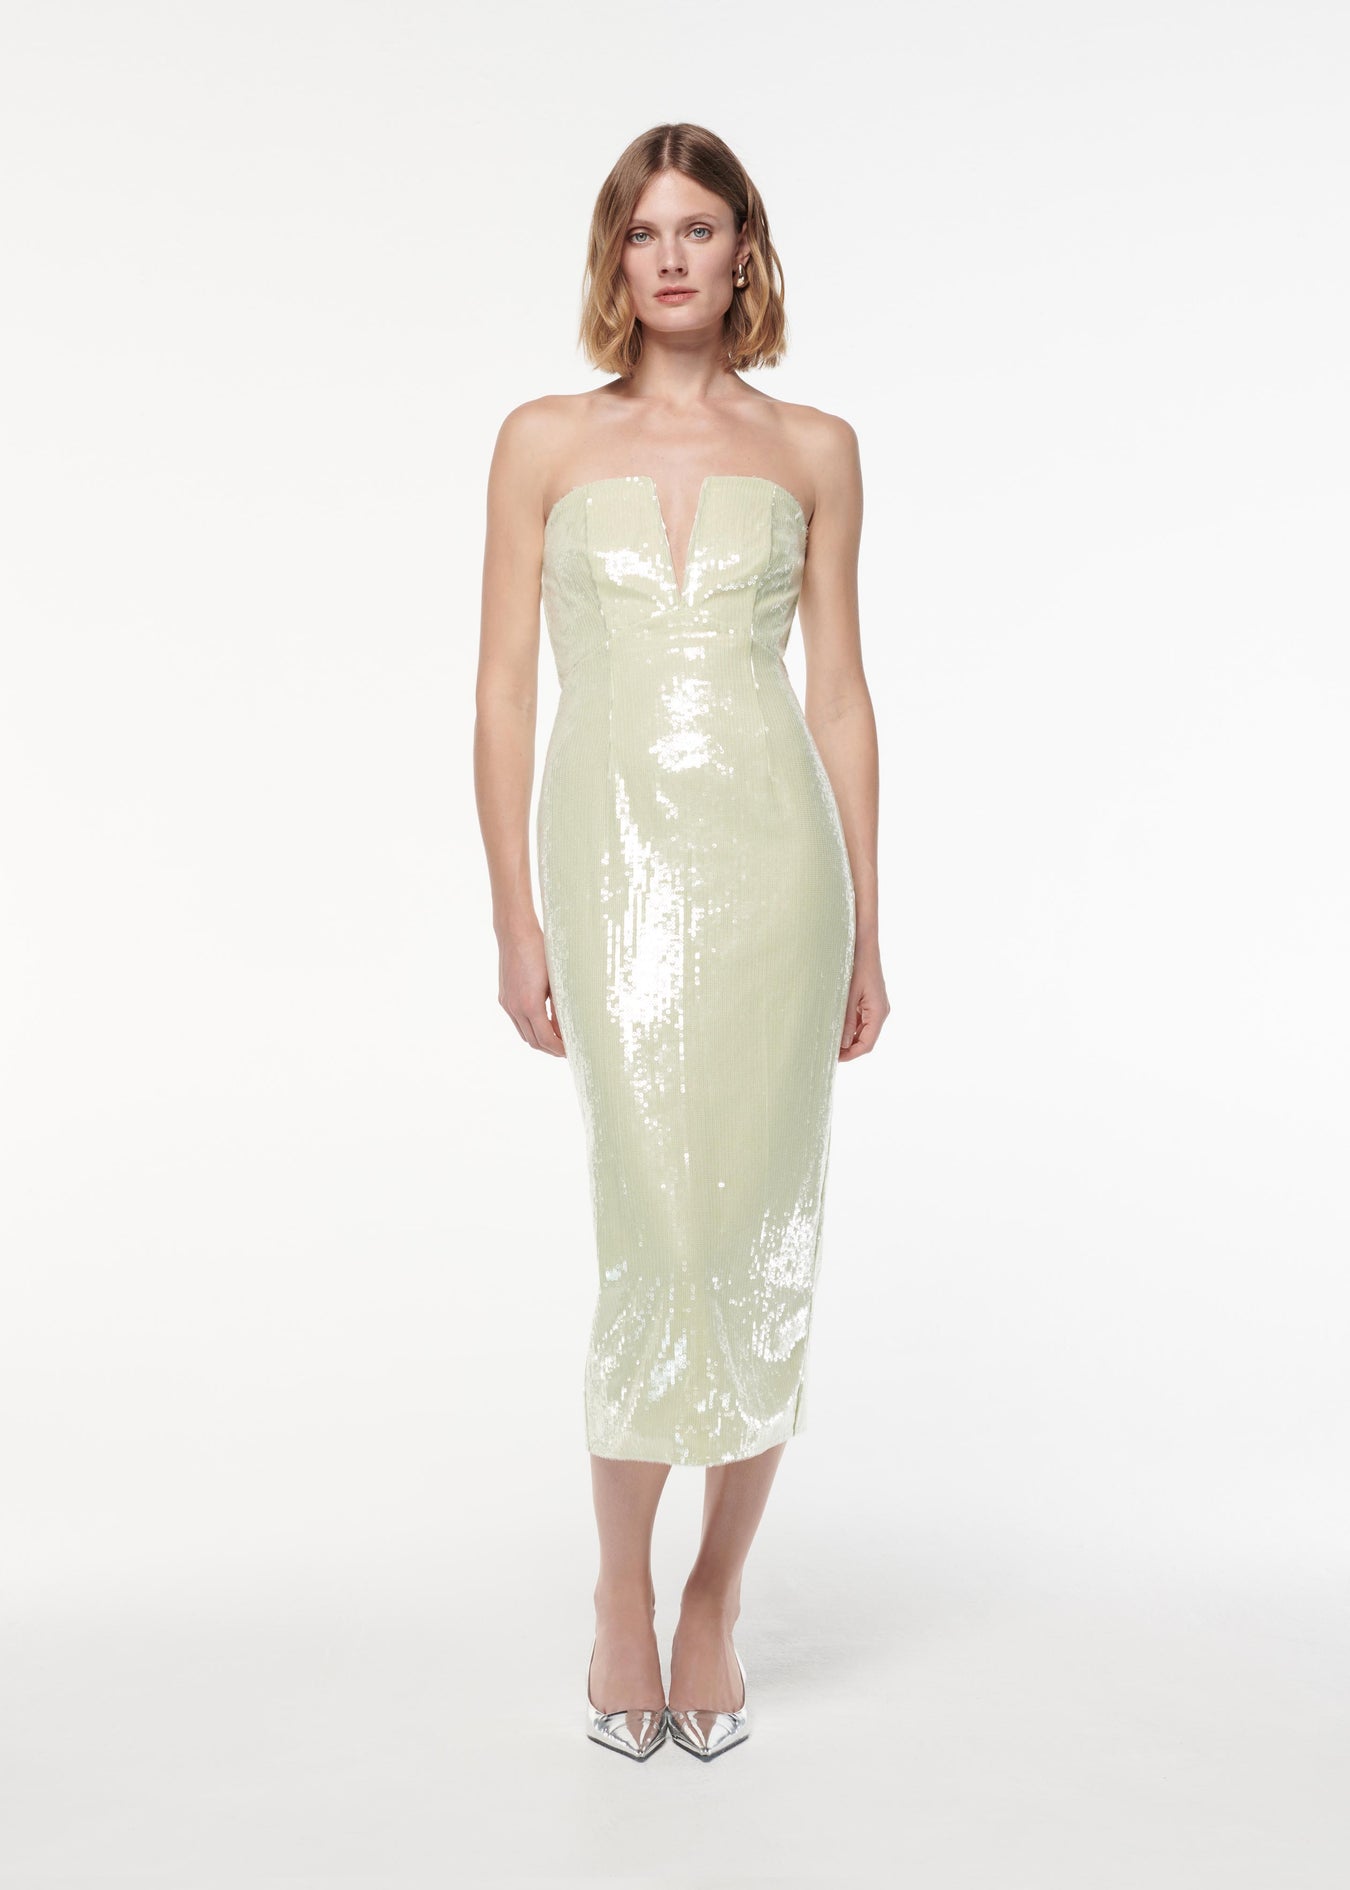 A photograph of a woman wearing a Strapless V Neck Sequin Midi Dress in Green